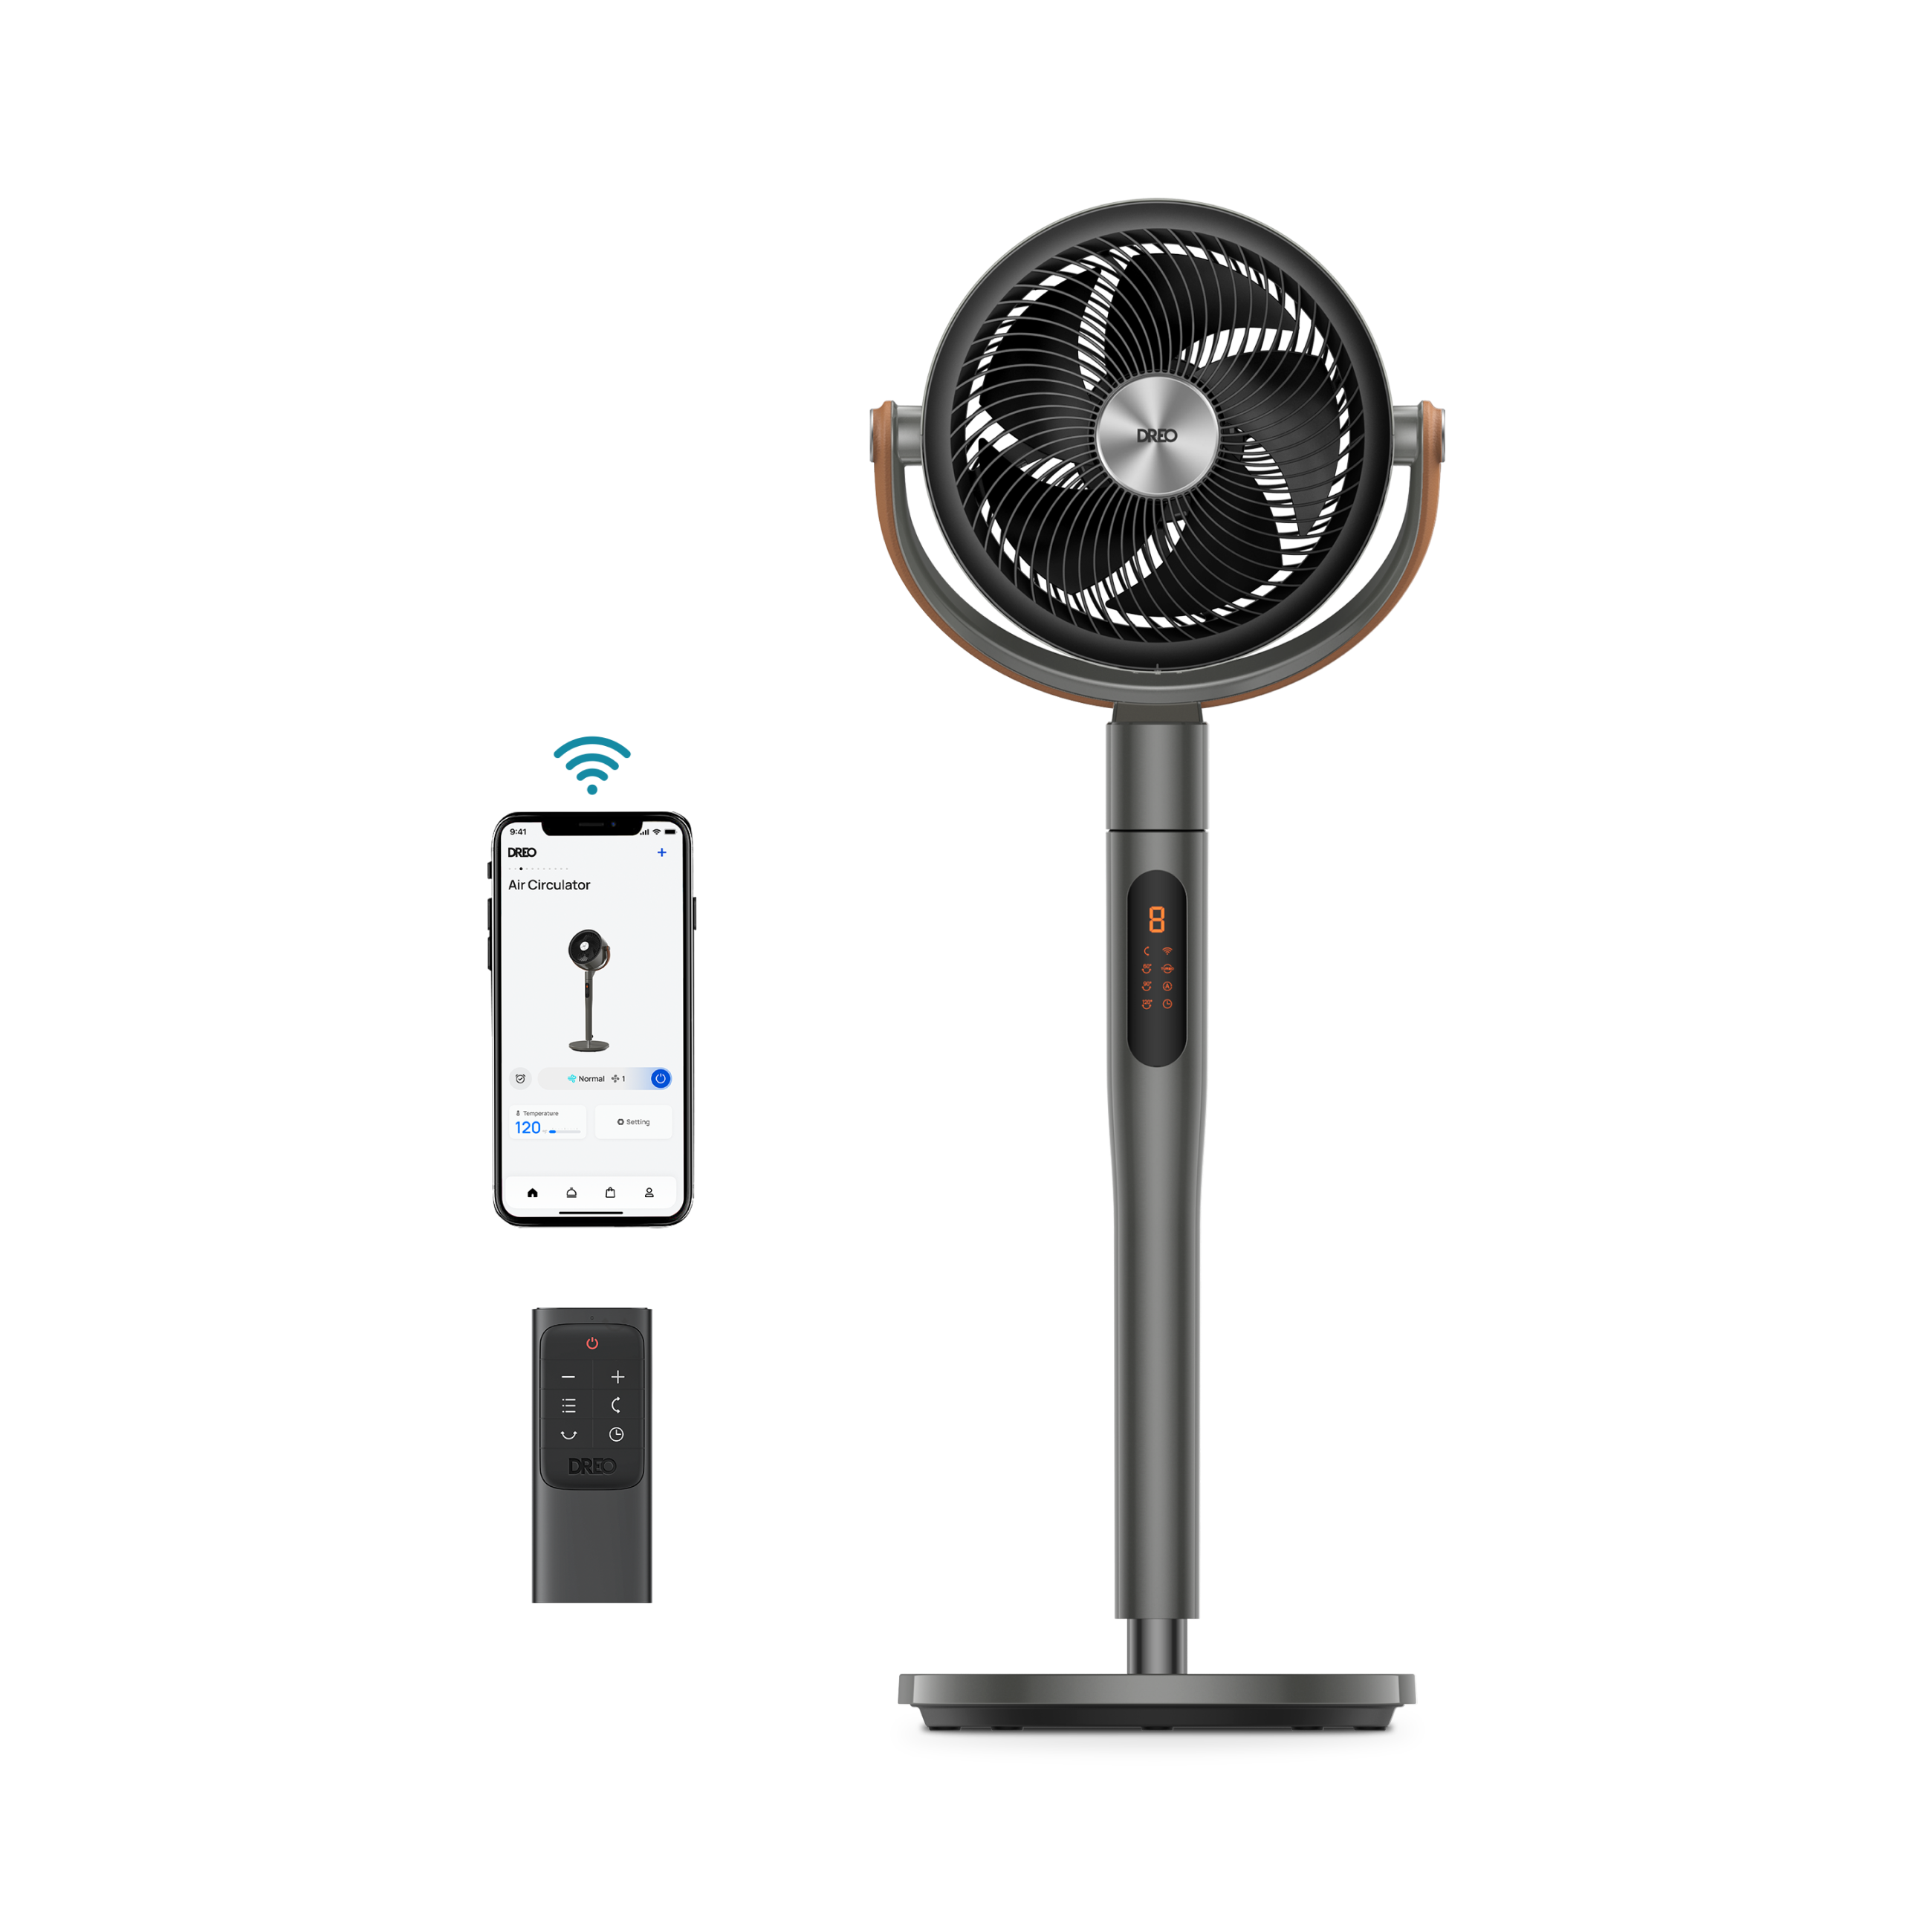 Dreo Pedestal Fan with Remote, 43'' Quiet Standing Fan for Home Bedroom, 120°+105° Smart Oscillating Floor Fans with Wi-Fi/Voice Control, Works with Alexa/Google, 6 Modes, 8 Speeds